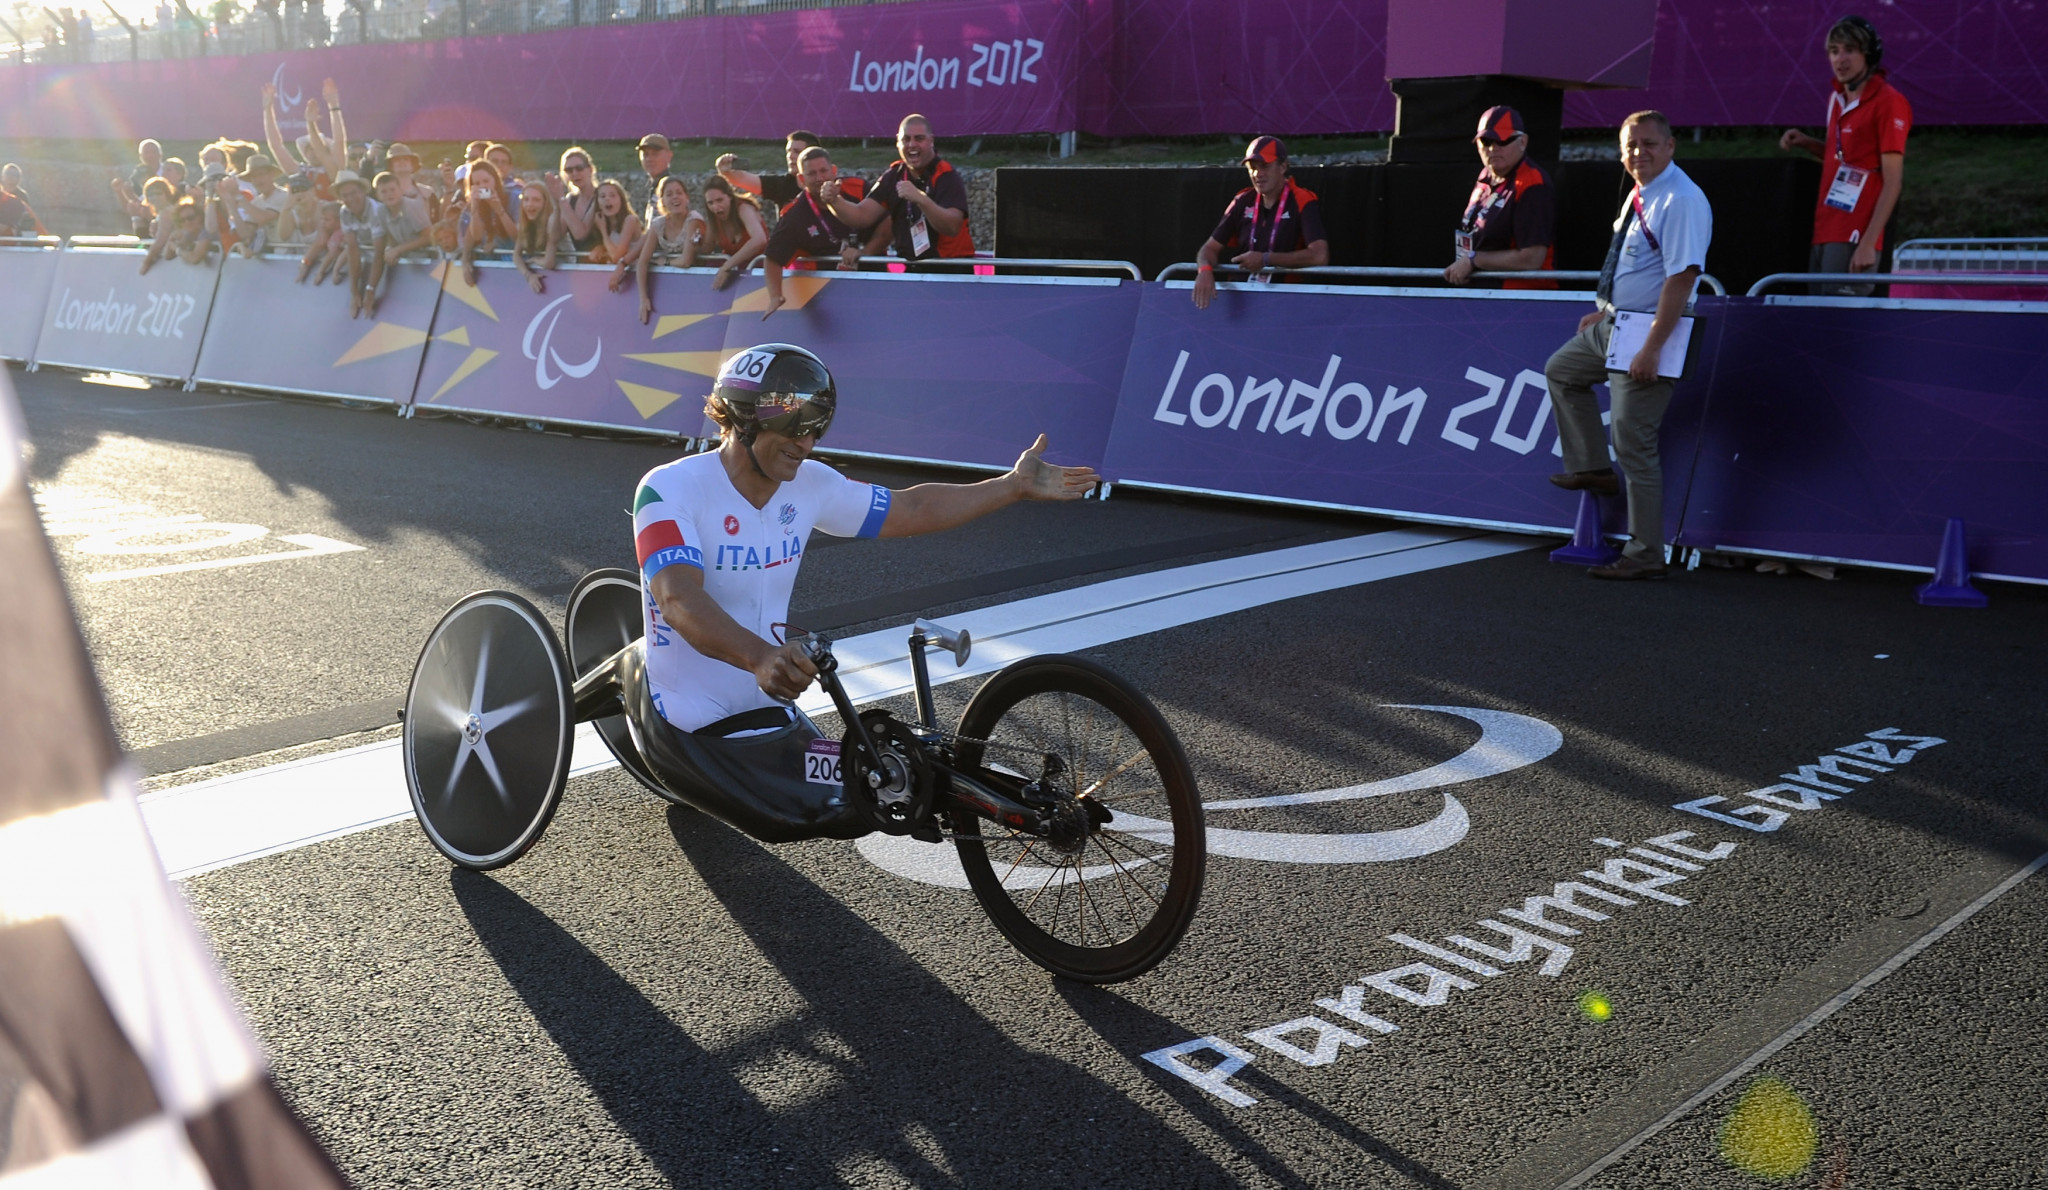 Alex Zanardi earned two gold medals at the London 2012 Olympic Games ©Getty Images